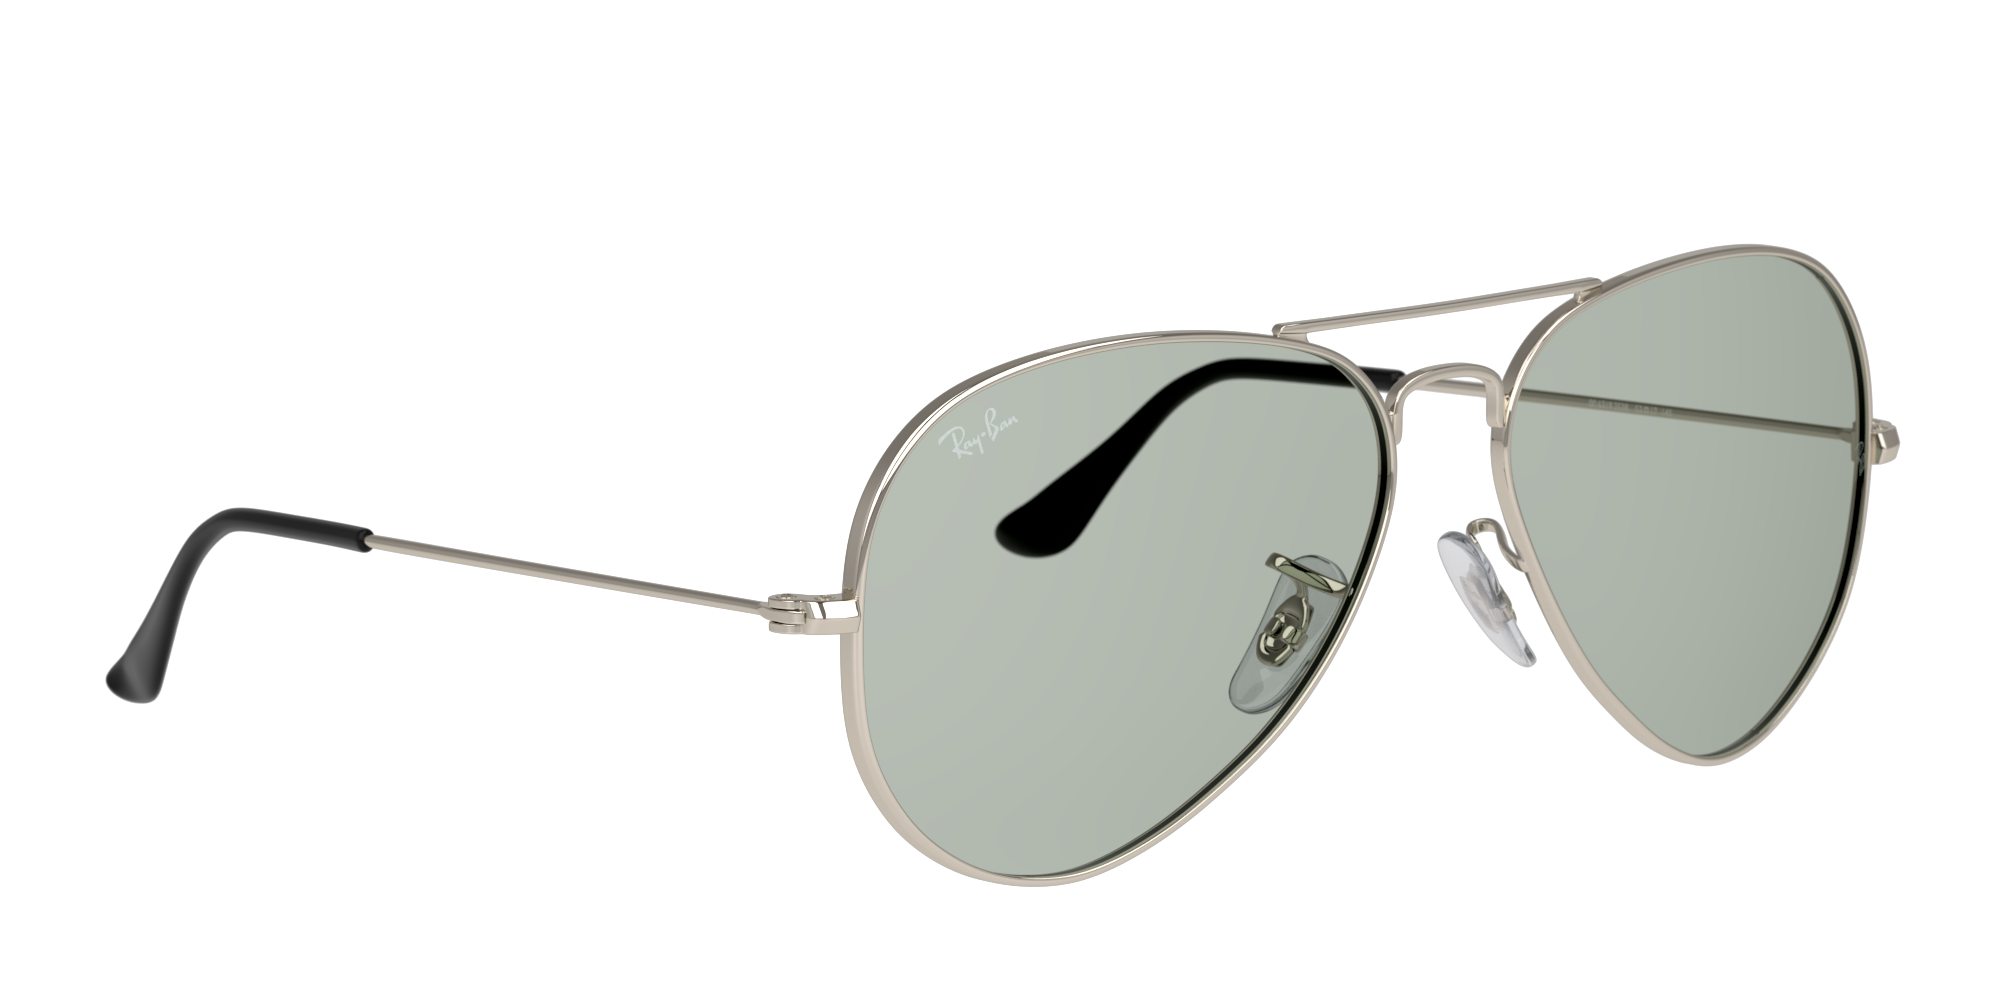 Angle_Right01 Ray-Ban Aviator Mirror RB3025 003/40 Grijs / Zilver